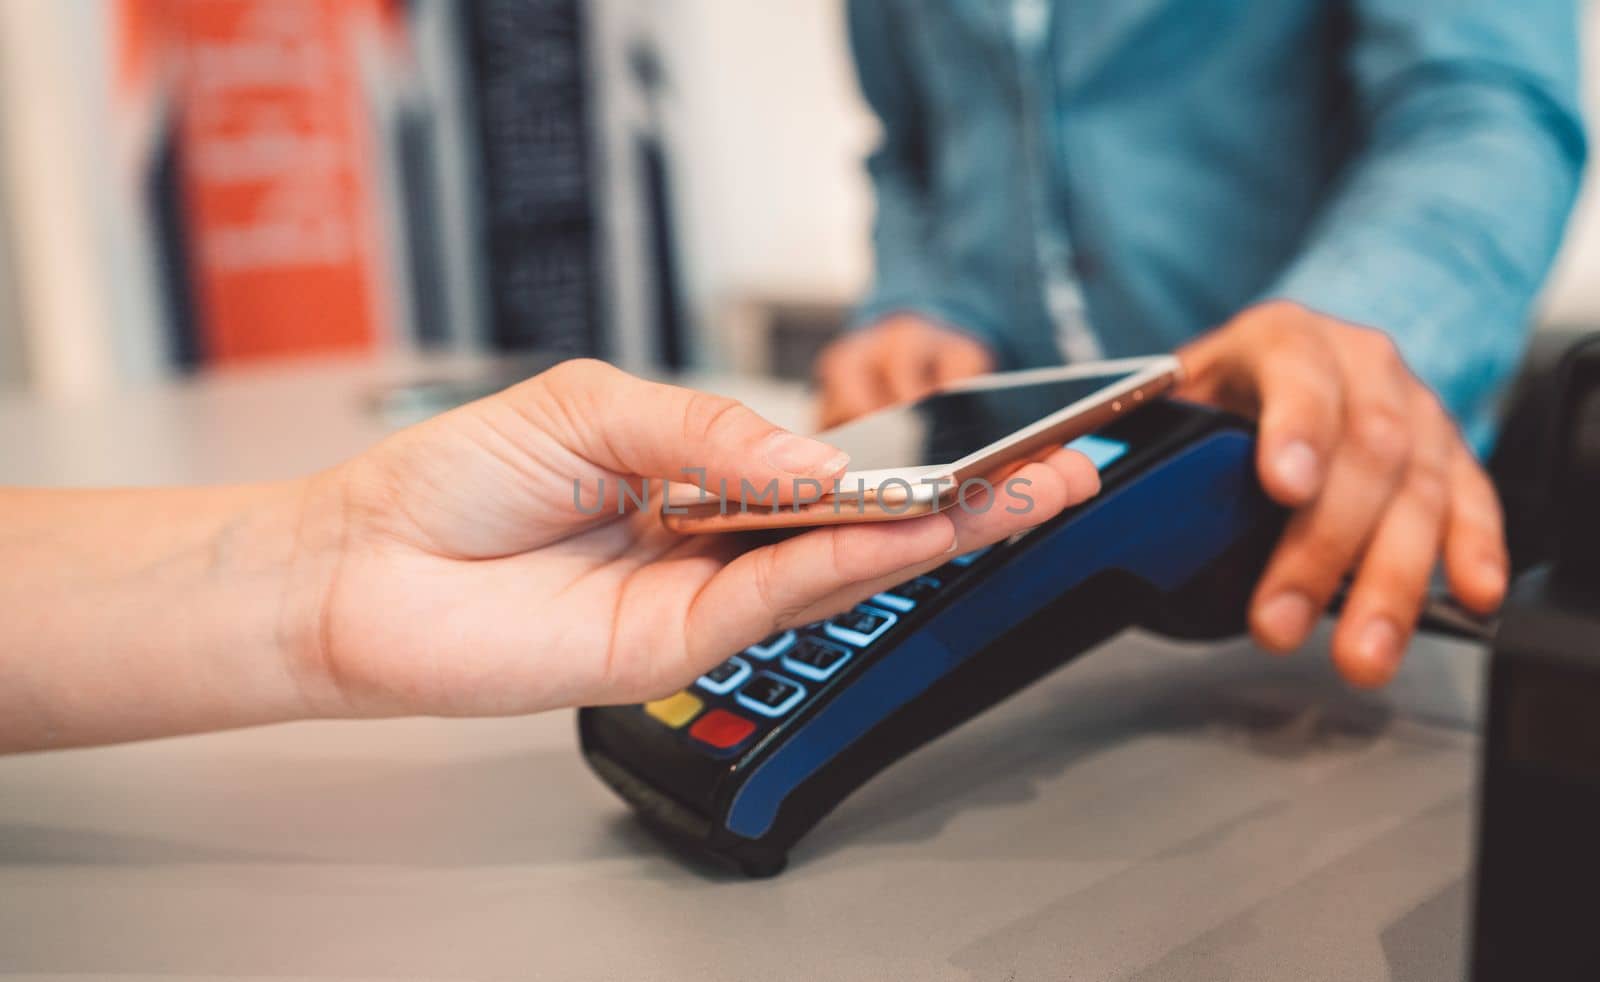 Wireless payment with a phone - Person holding a phone over the credit card reader by VisualProductions